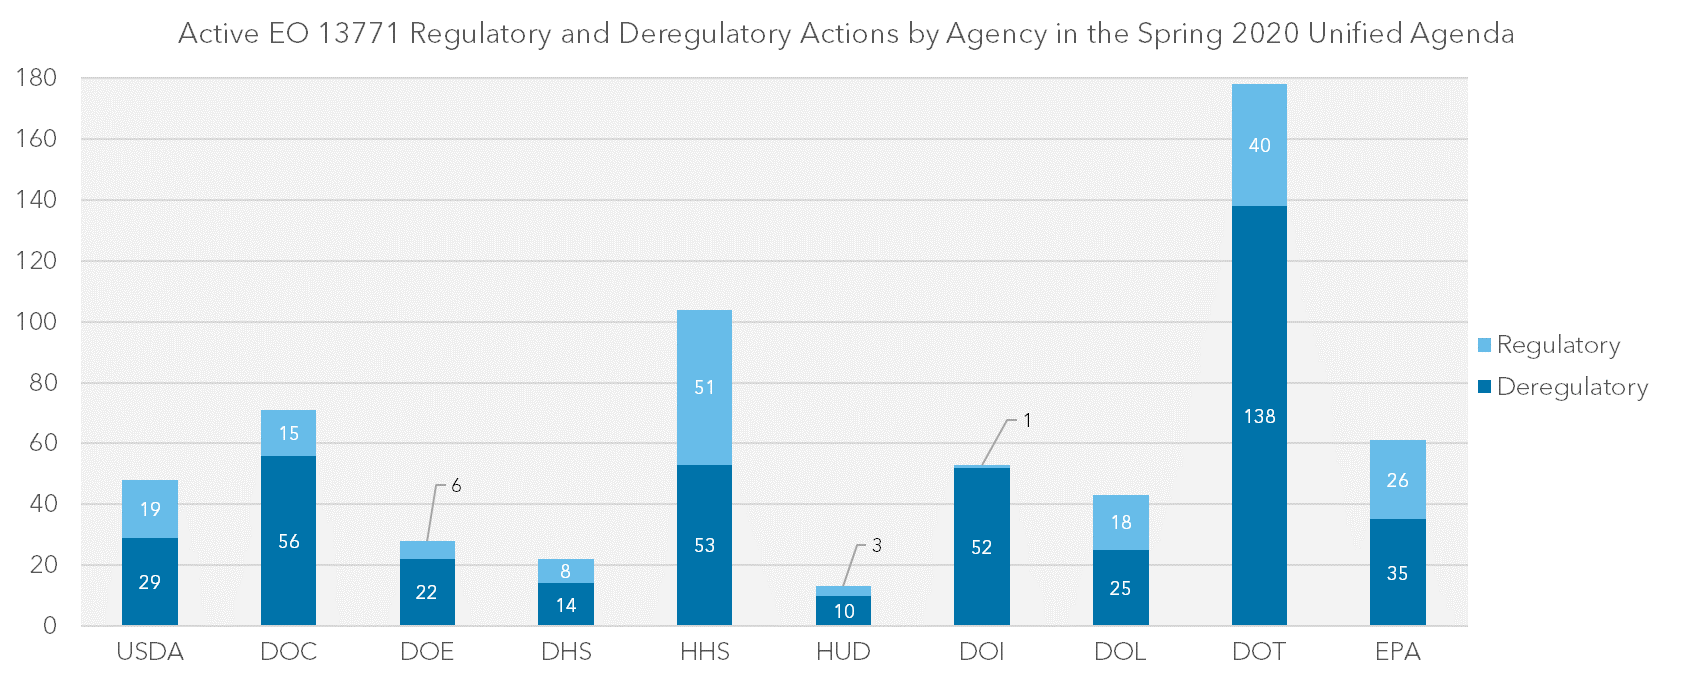 Bar chart of the active Executive Order 13771 regulatory and deregulatory actions by agency in the Spring 2020 Unified Agenda.